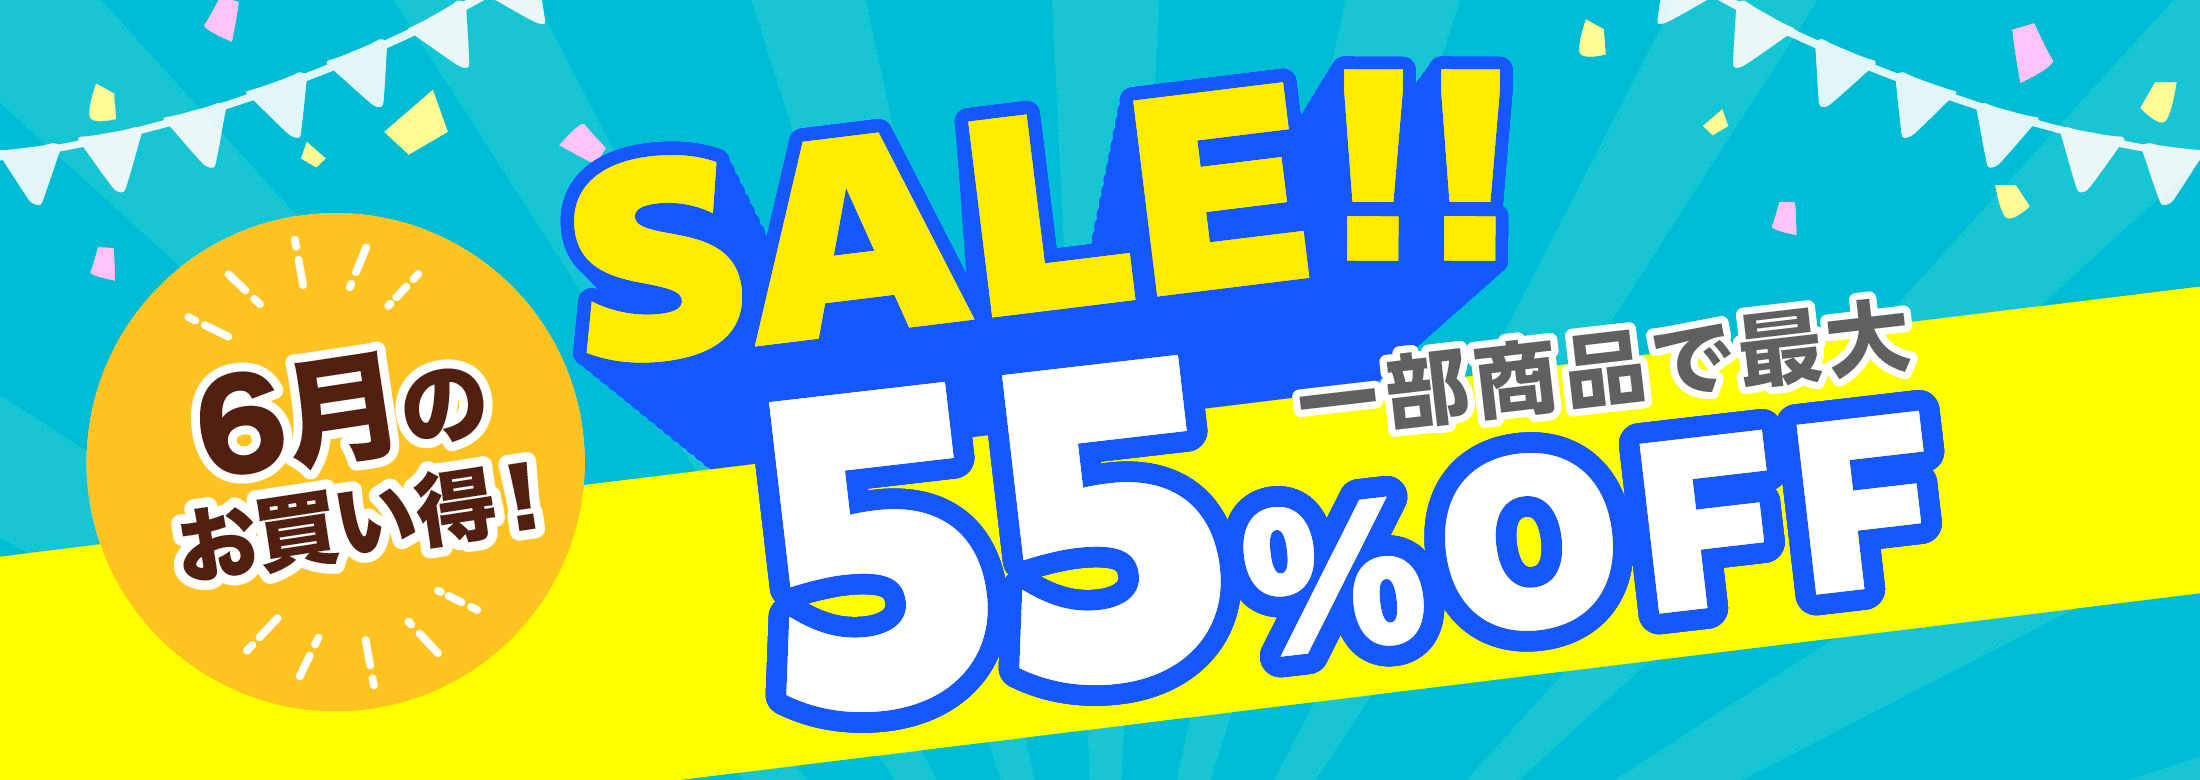 special_sale2406 ｜チョコザップ